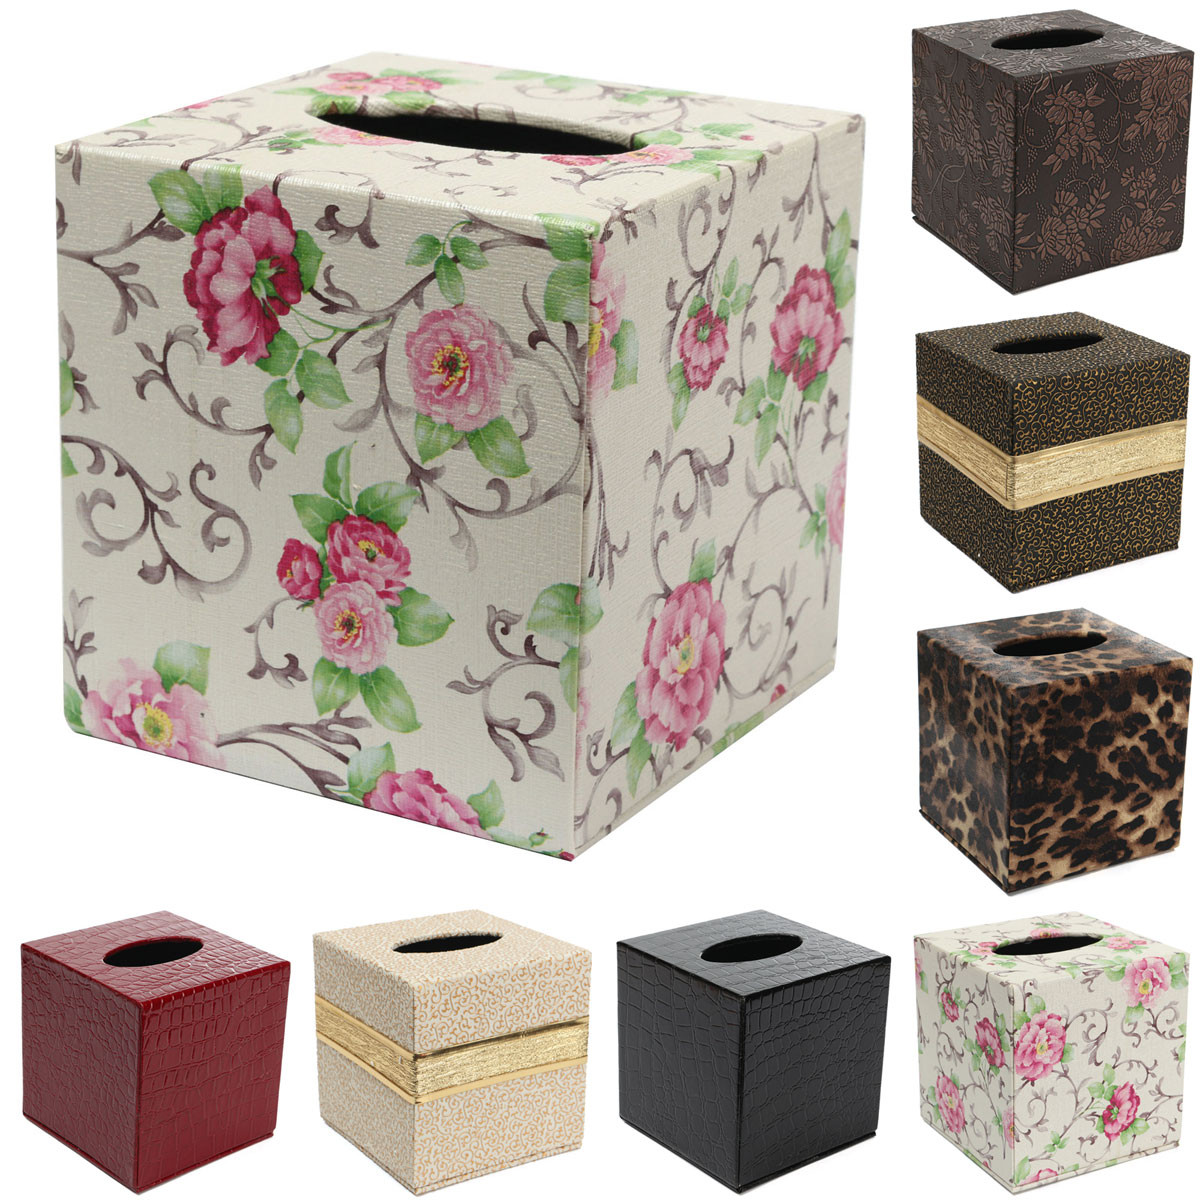 Durable-PU-Leather-Tissue-Box-Case-Cover--Paper-Napkin-Holder-Home-Office-1304877-2